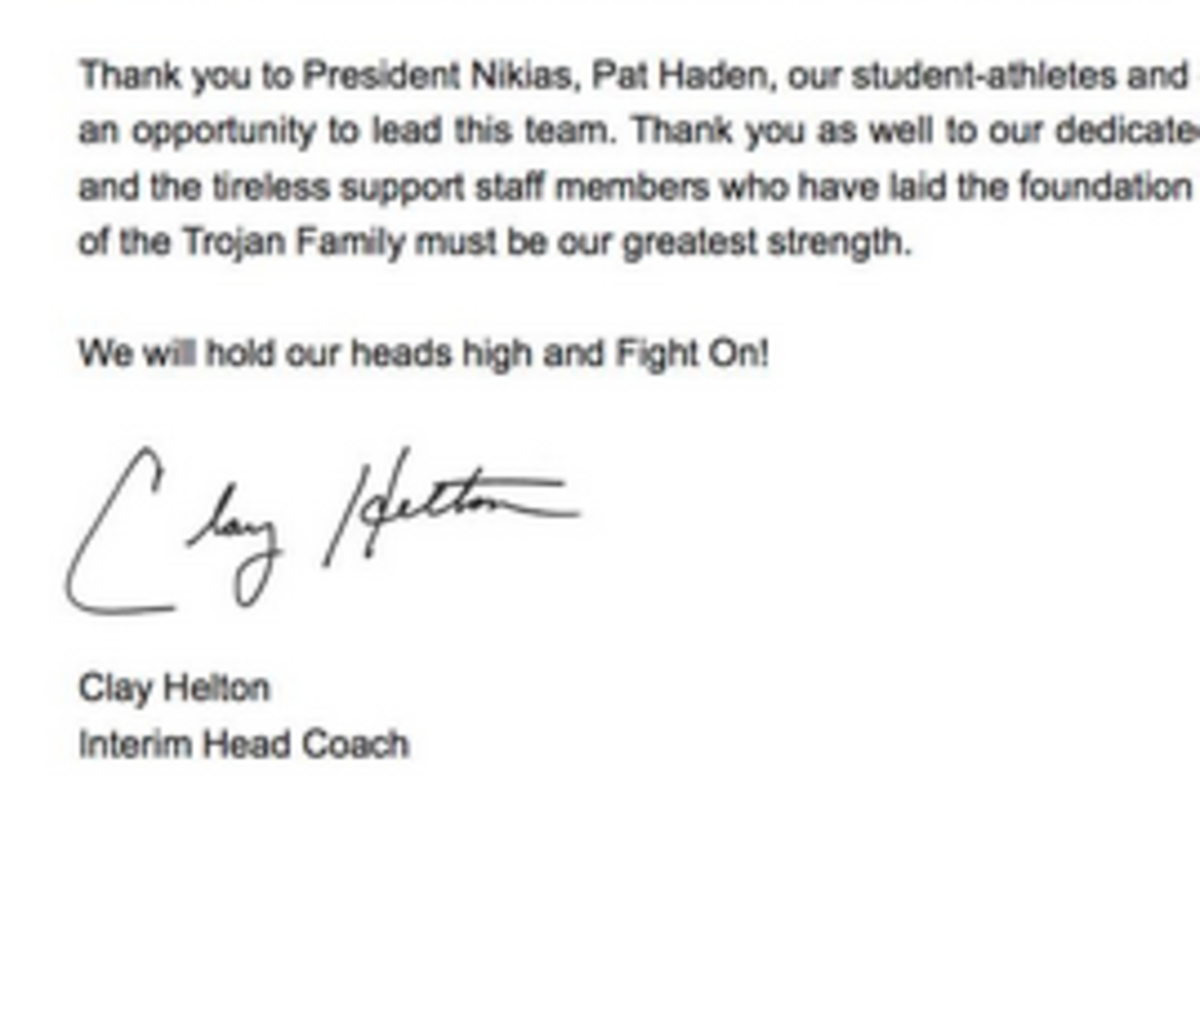 Interim USC Coach Clay Helton's letter to the Trojan family.